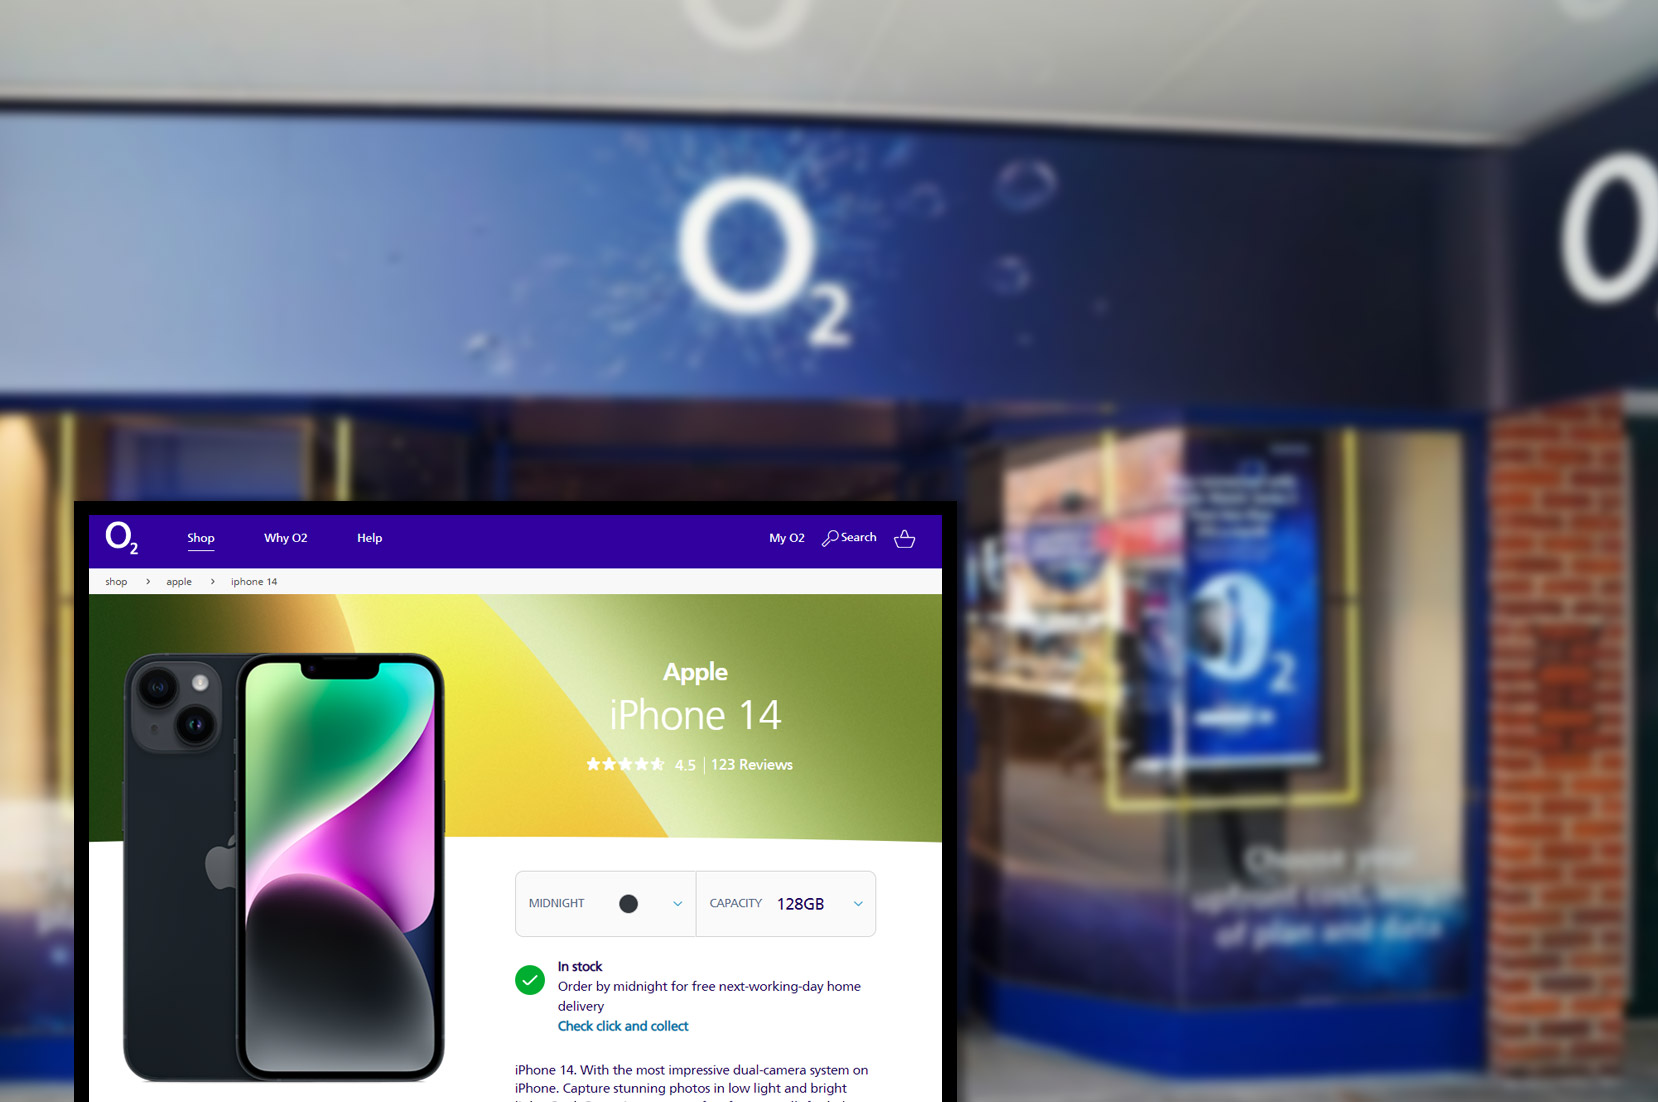 o2-co-ukproduct-pricing-information-and-image-scraping-services